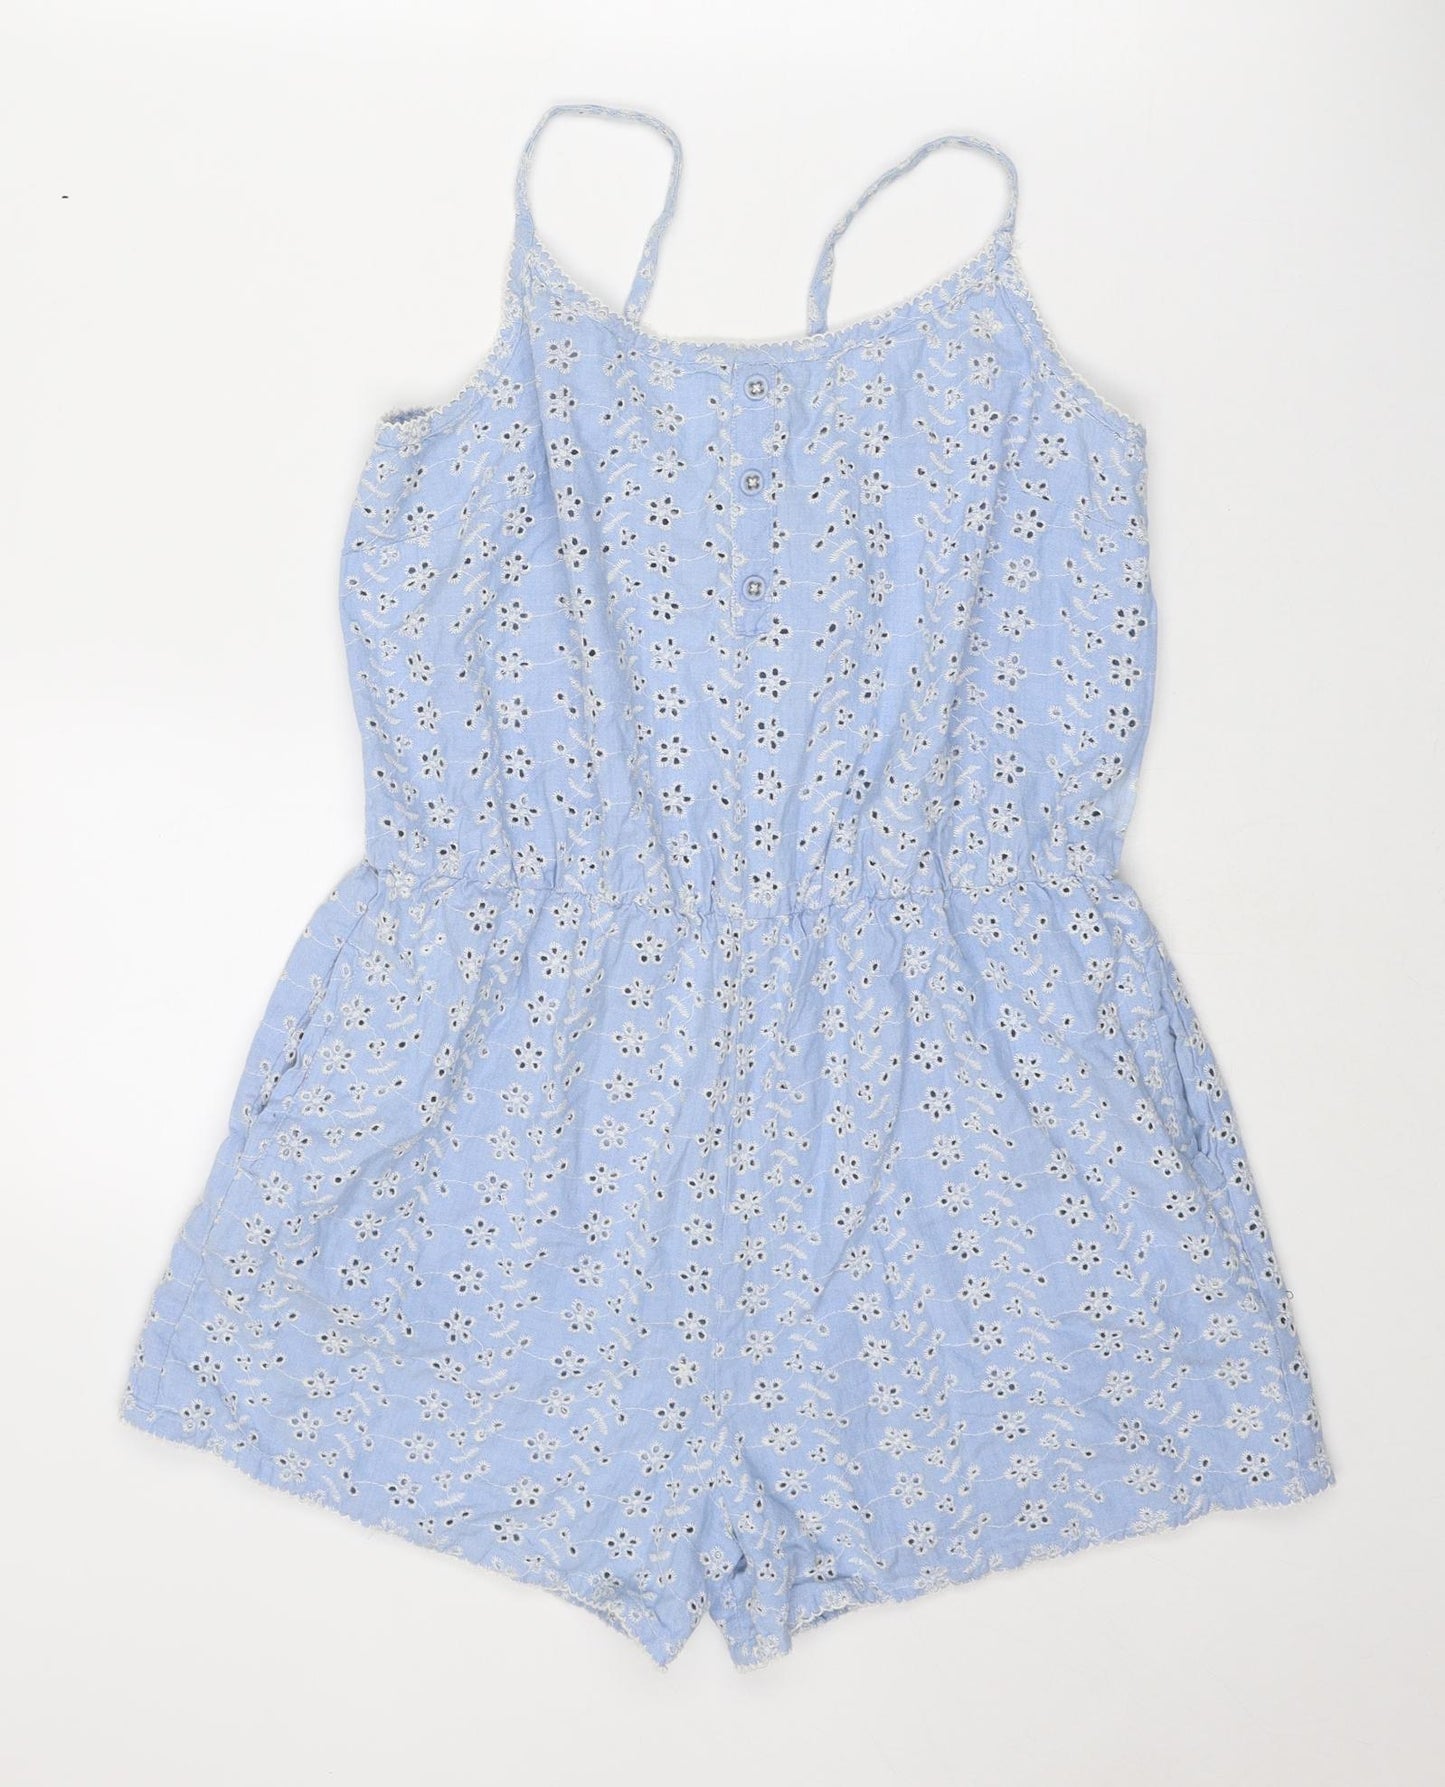 Isla Rose Womens Blue Floral Cotton Playsuit One-Piece Size M L3 in Tie